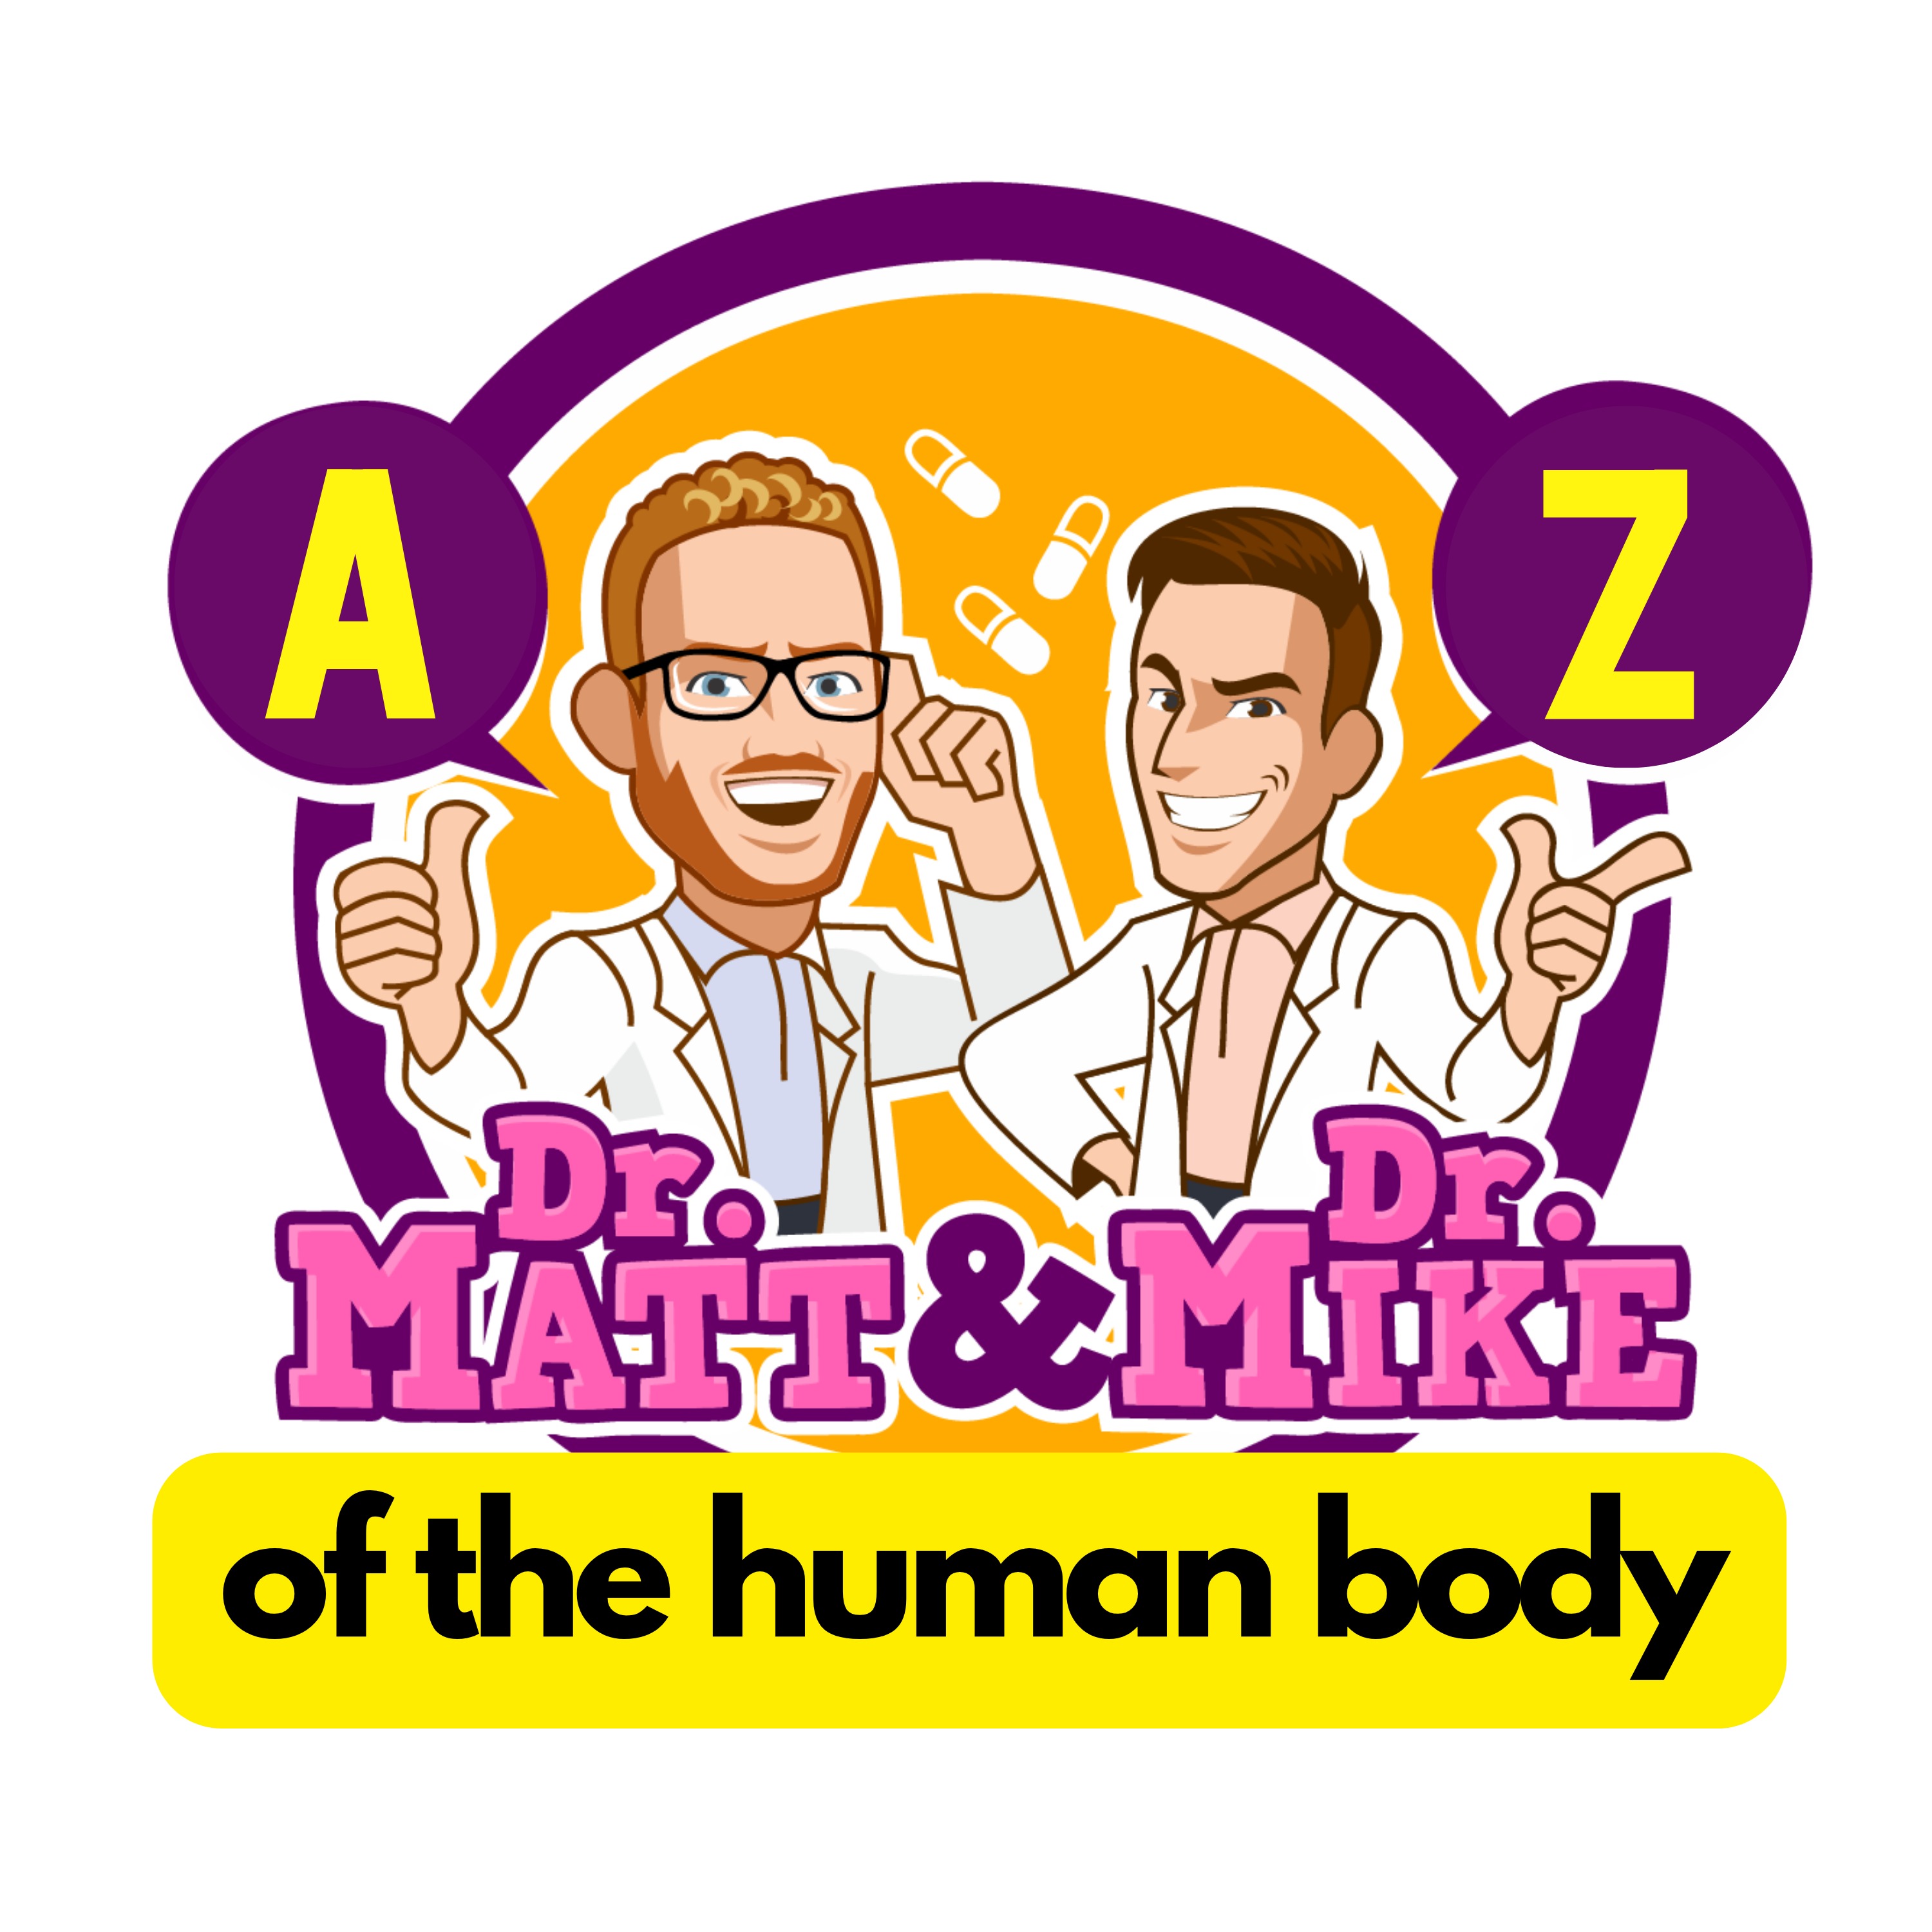 Allosteric Site | A-Z of the Human Body